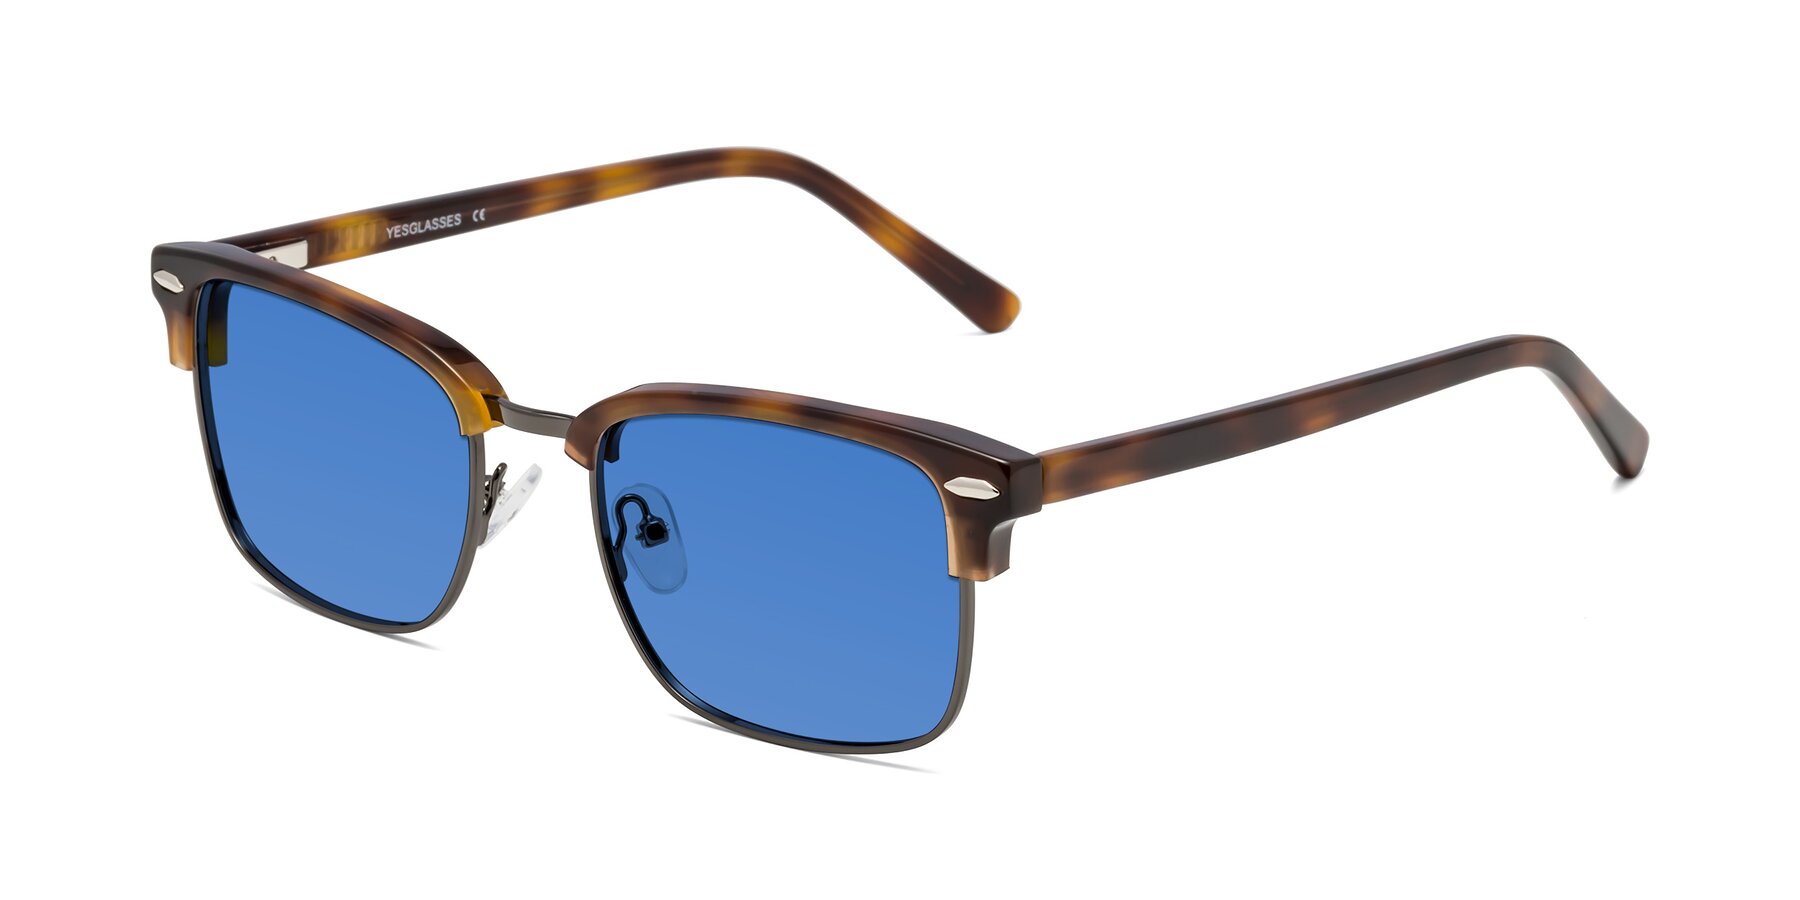 Angle of 17464 in Tortoise/ Gunmetal with Blue Tinted Lenses